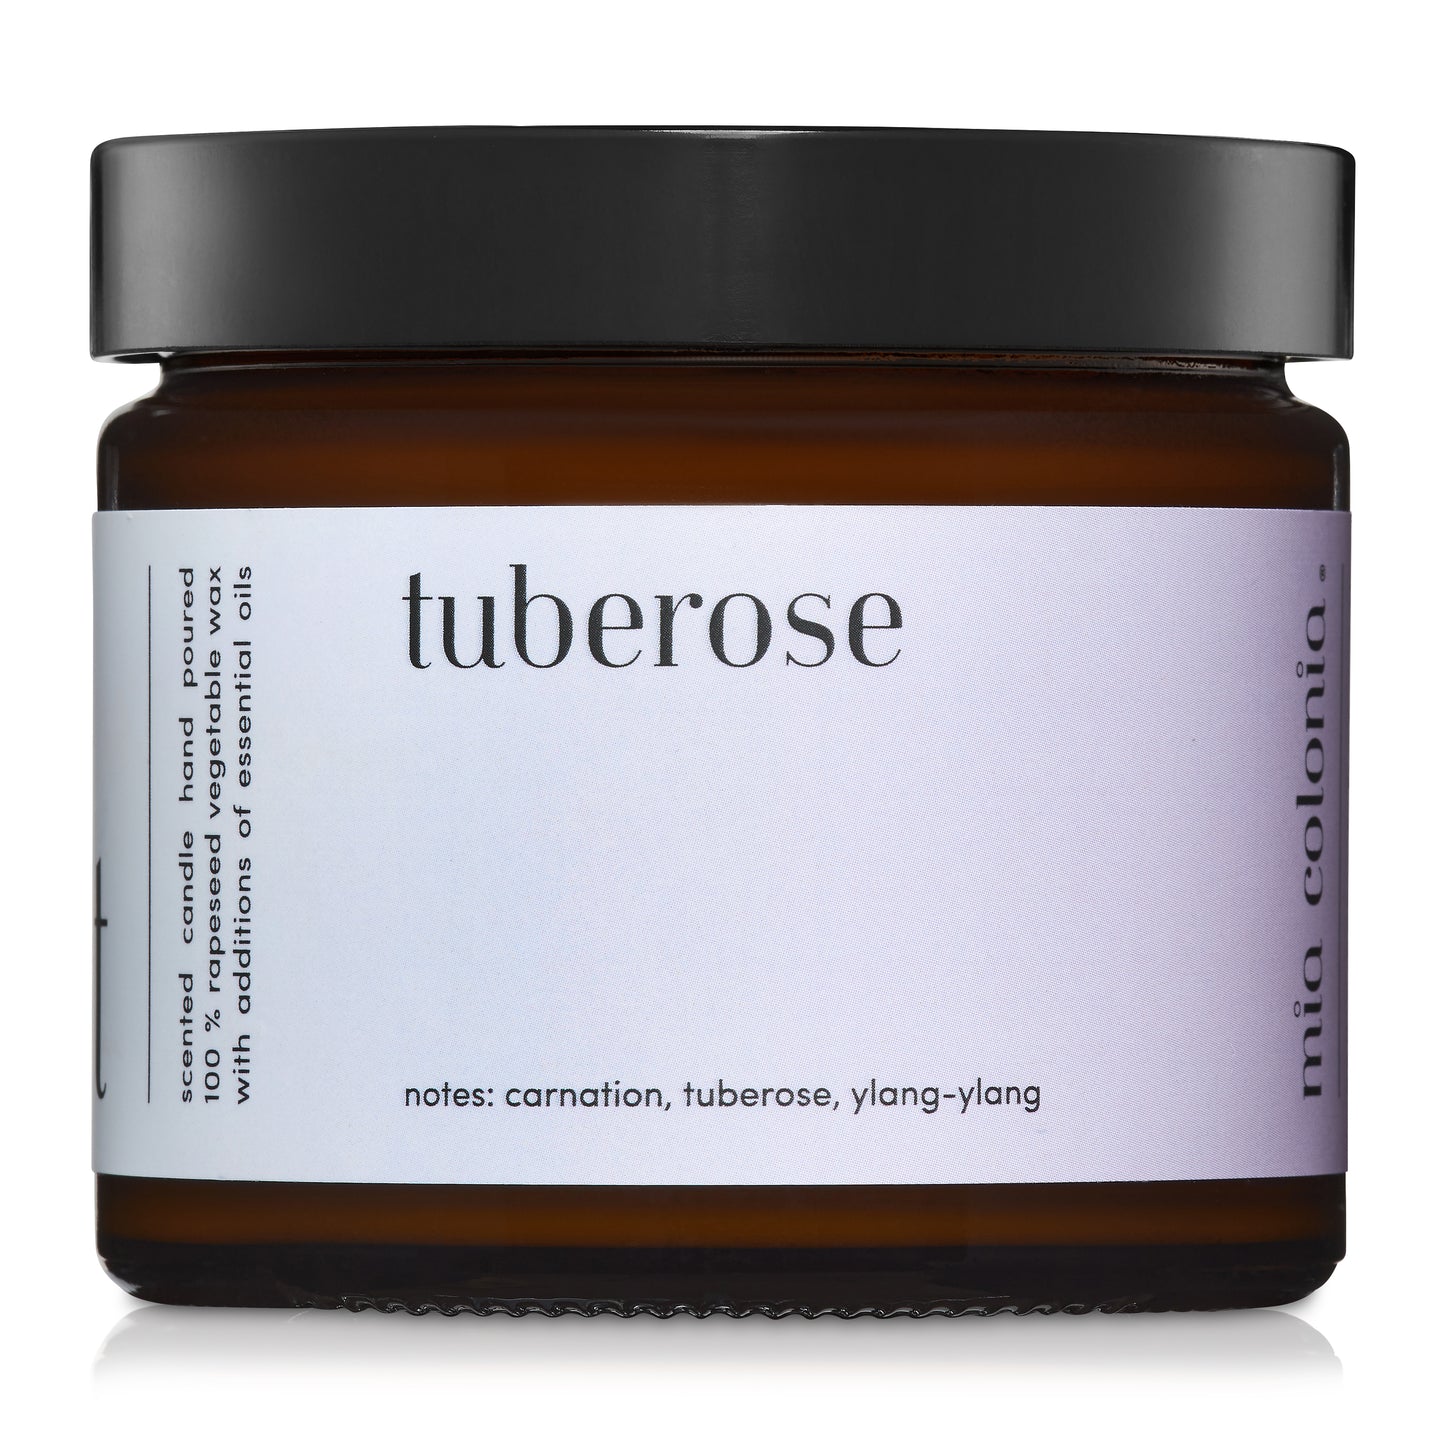 "Tuberose" scented candle 100% natural rapeseed wax 250g